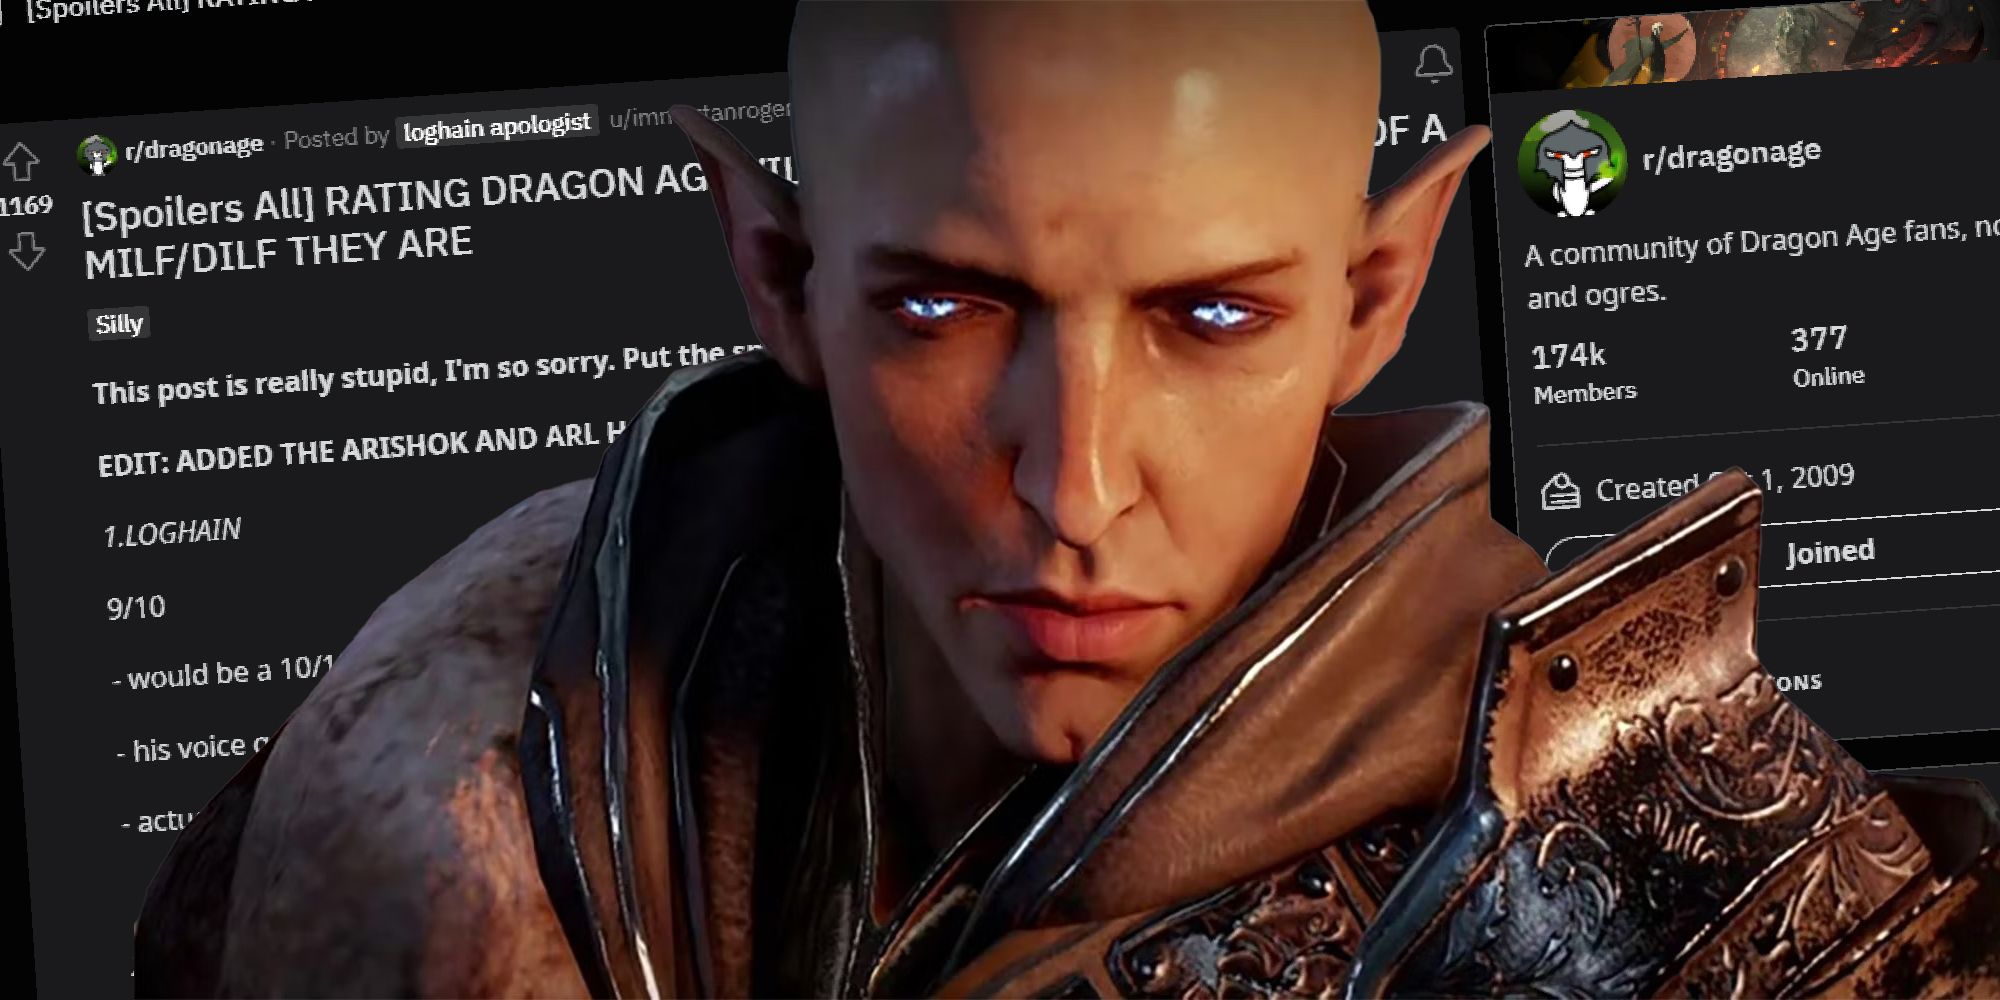 Dragon Age 4: 10 Characters Fans Want To Return, According To Reddit